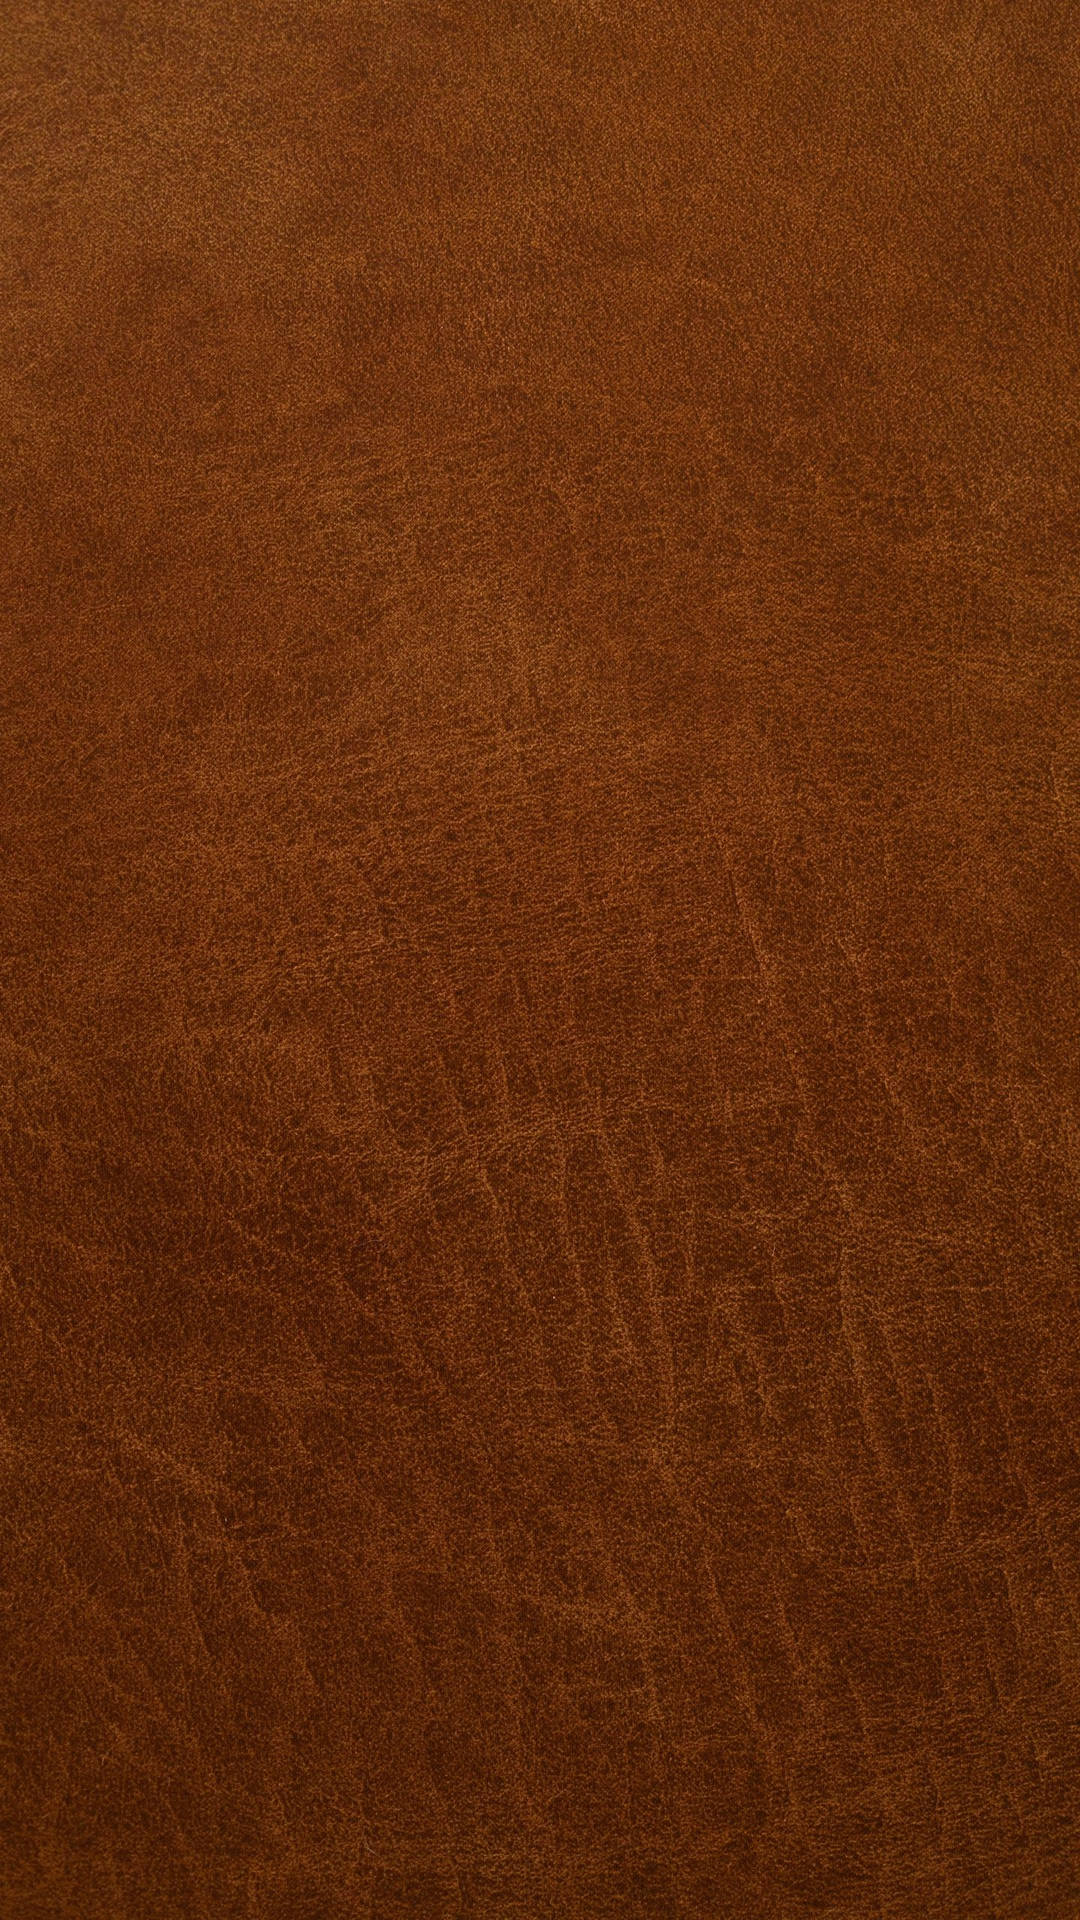 Leather Texture Brown Iphone Wallpaper